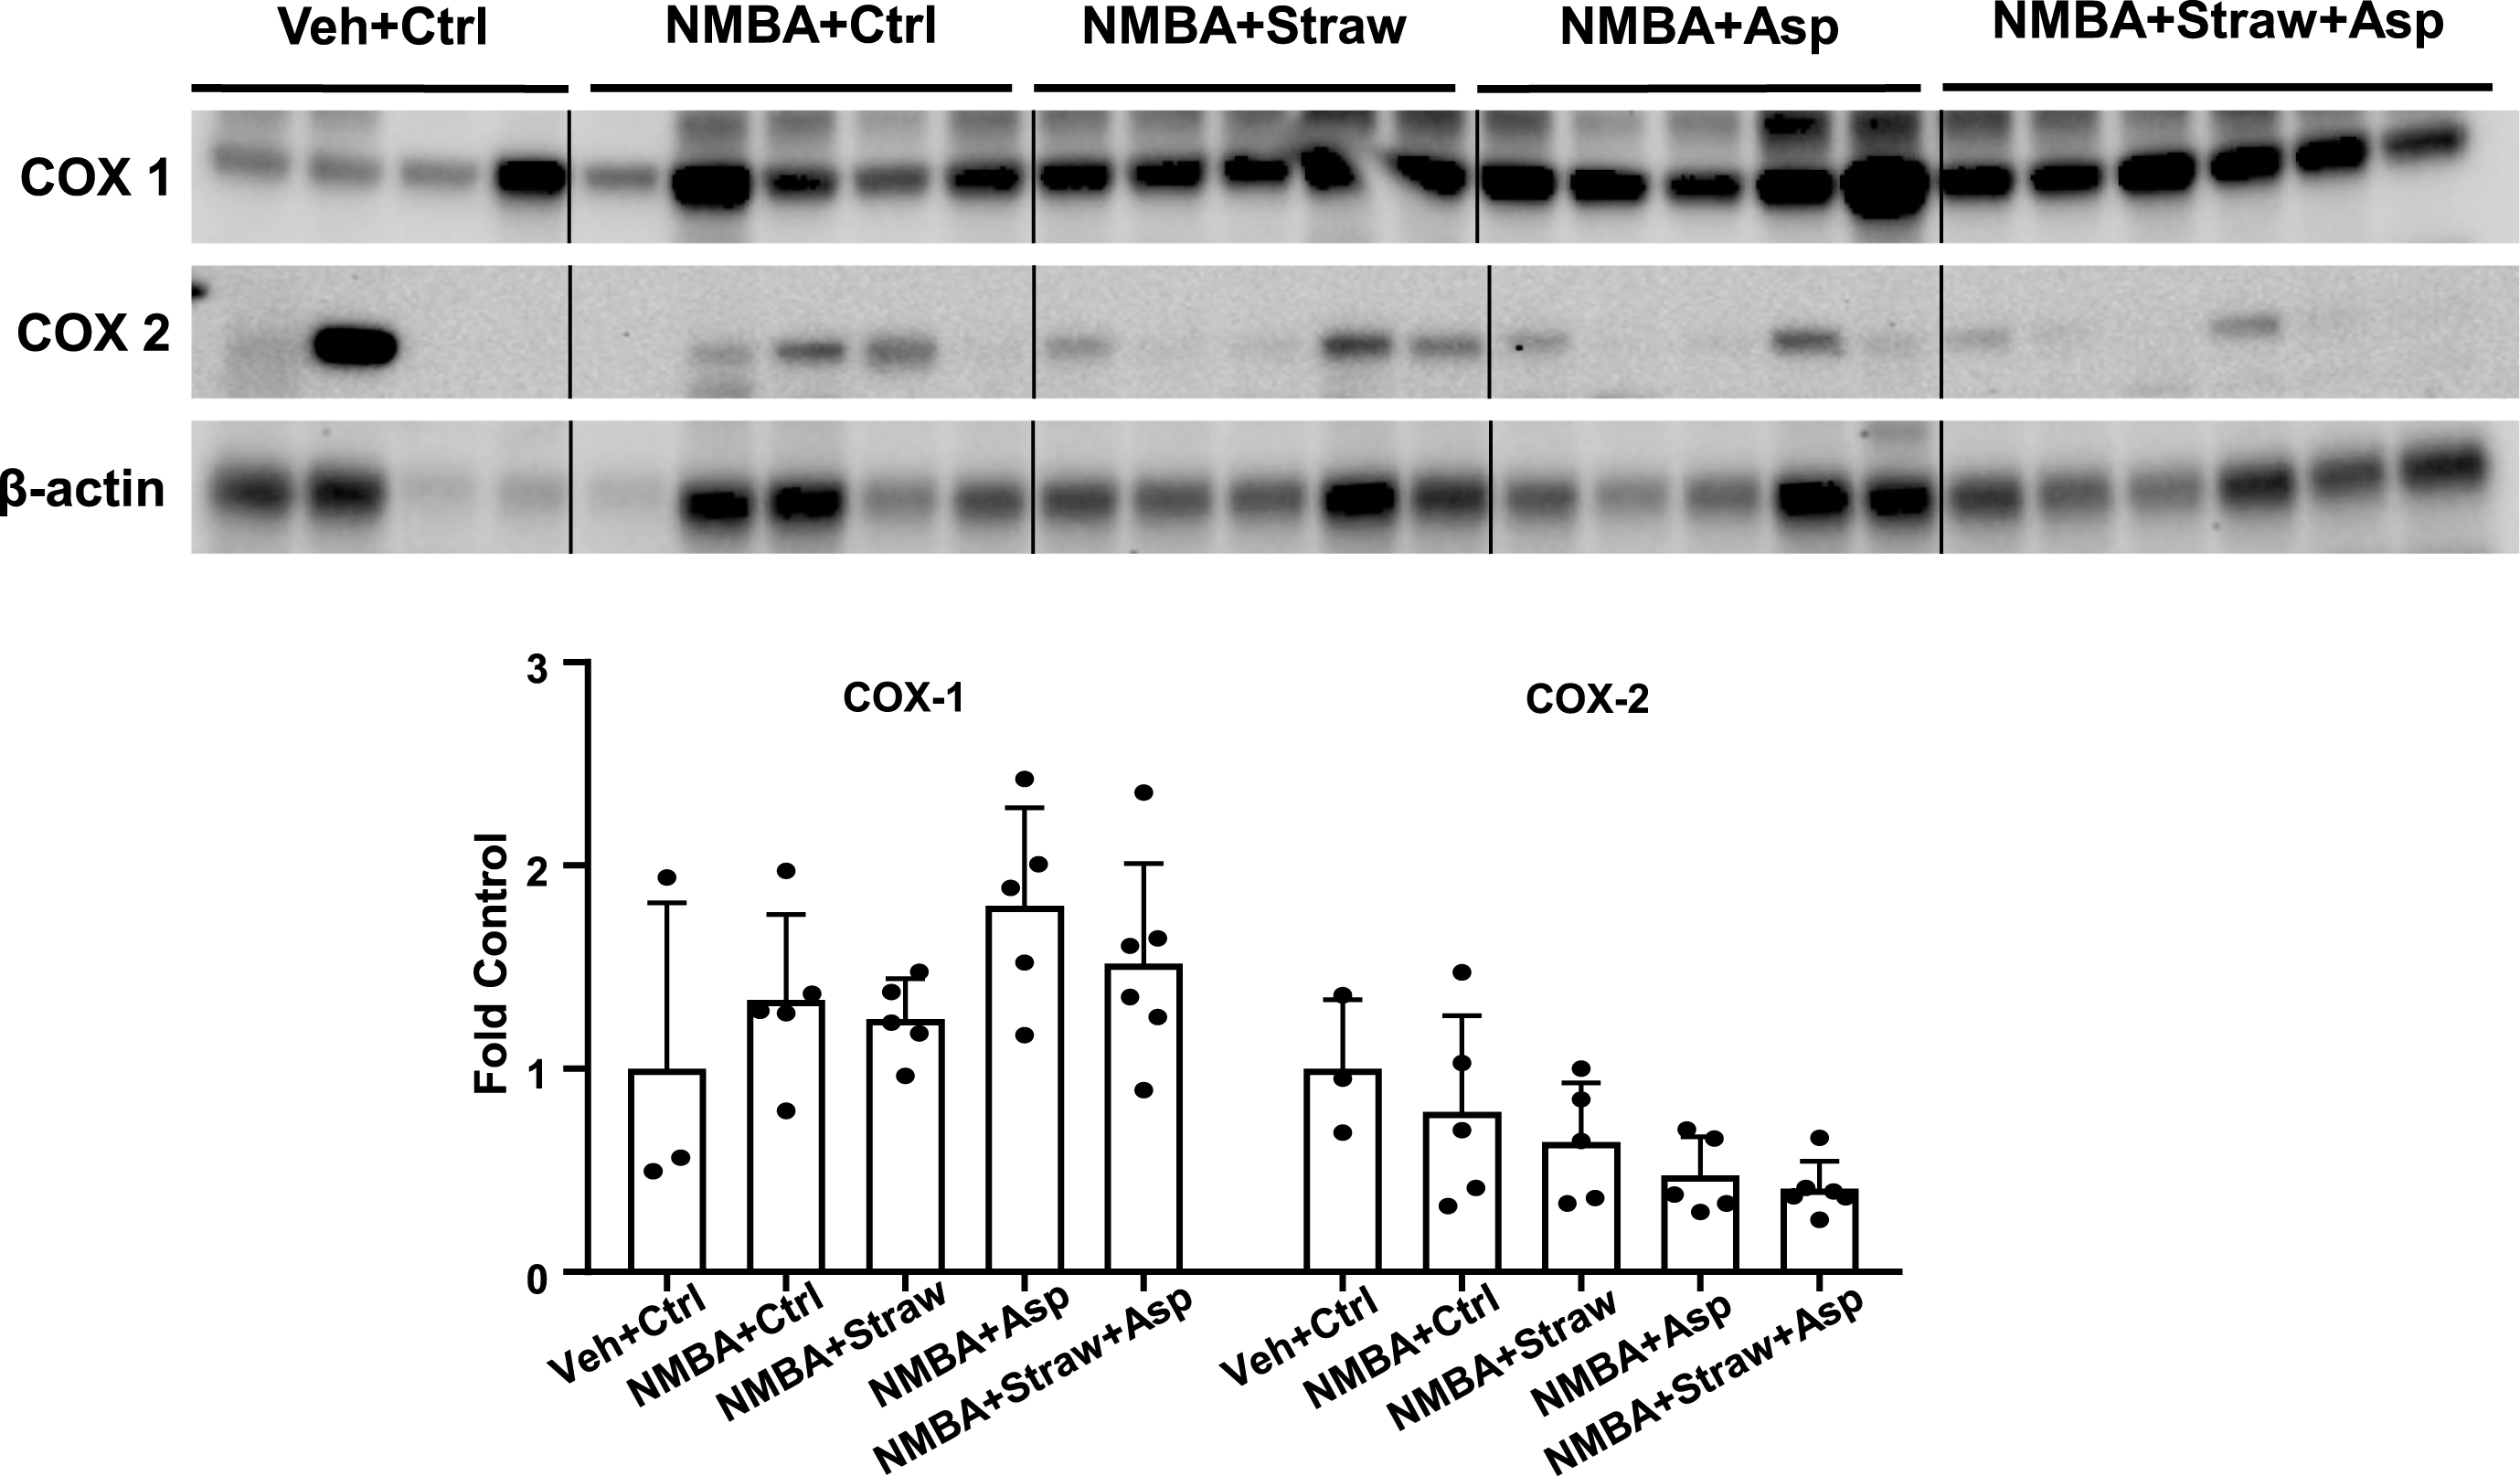 Strawberries and aspirin do not affect cyclooxygenase expression. Rat esophagi were collected and analyzed with western blotting to examine the expression of COX-1 and COX-2. No significant changes were observed in either the control groups or the groups on the study diets. n = 4–6.